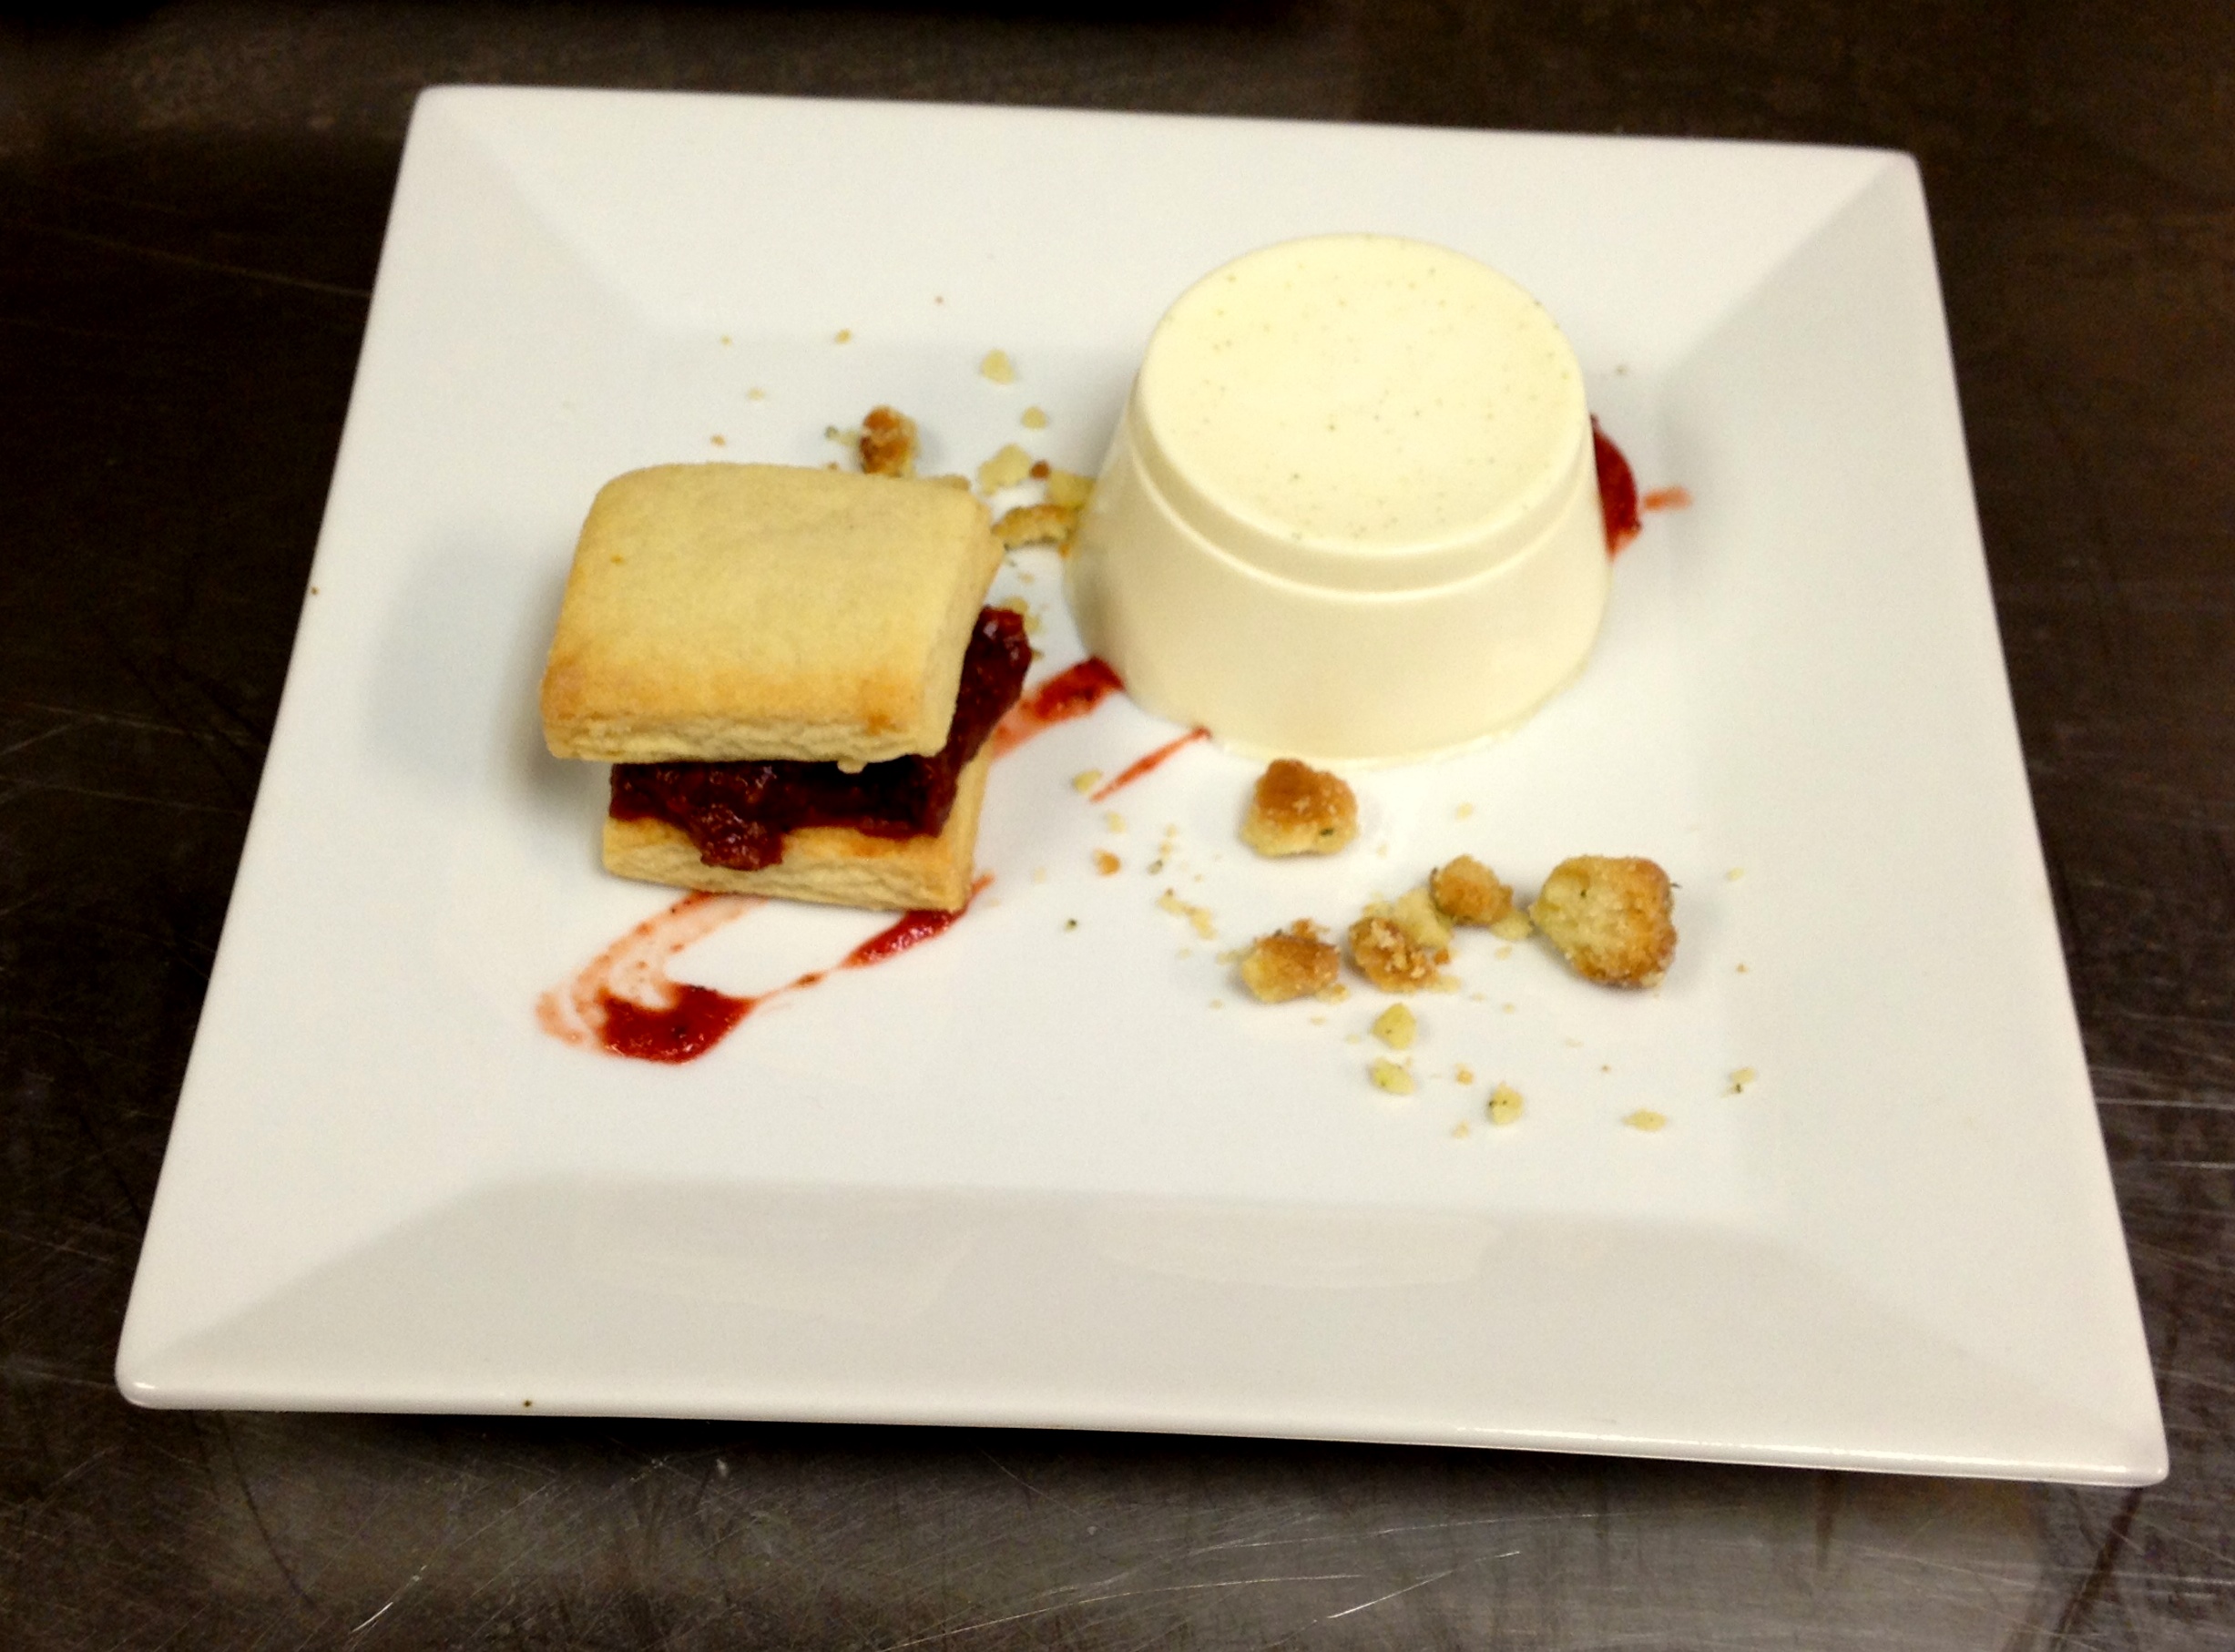 Bay Leaf Panna Cotta, featuring bay leaves from Touisset Marsh, and Rose Hip Jam Shortbread Sandwiches, featuring rose hips from Seapowet Salt Marsh